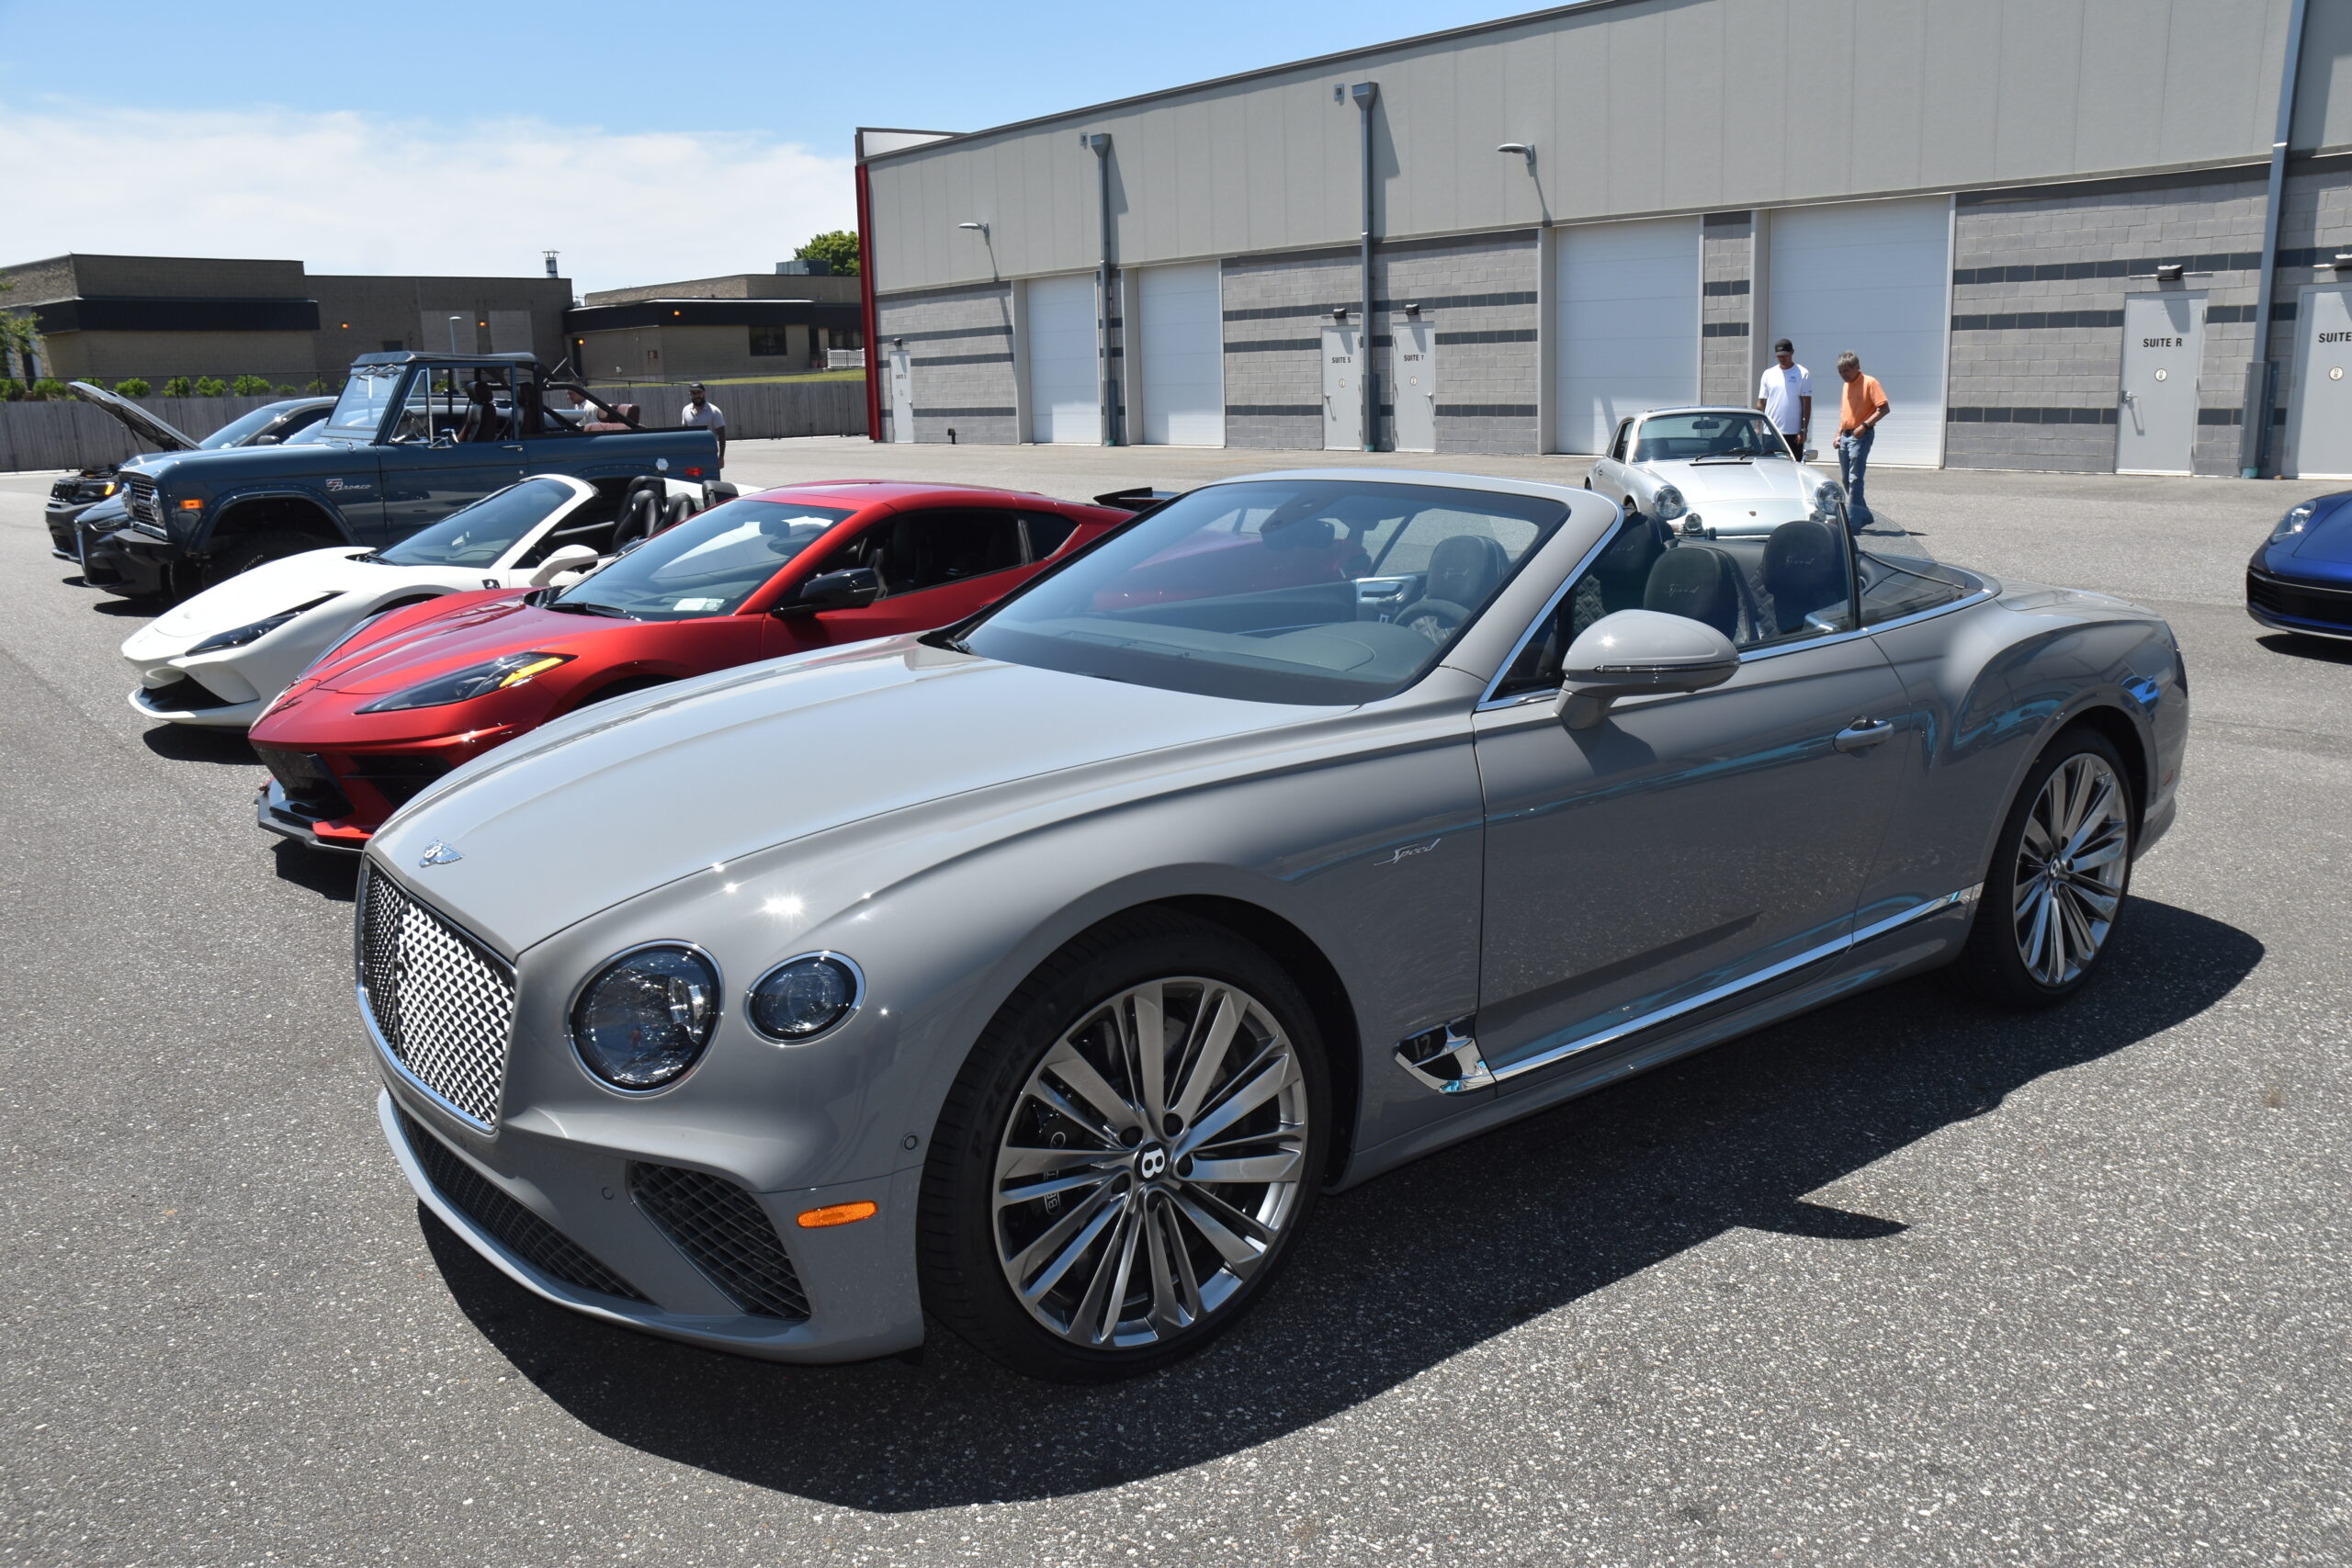 This Bentley GT Speed will be on display at the Westhampton Beach Concours on Saturday. STEPHEN J. KOTZ